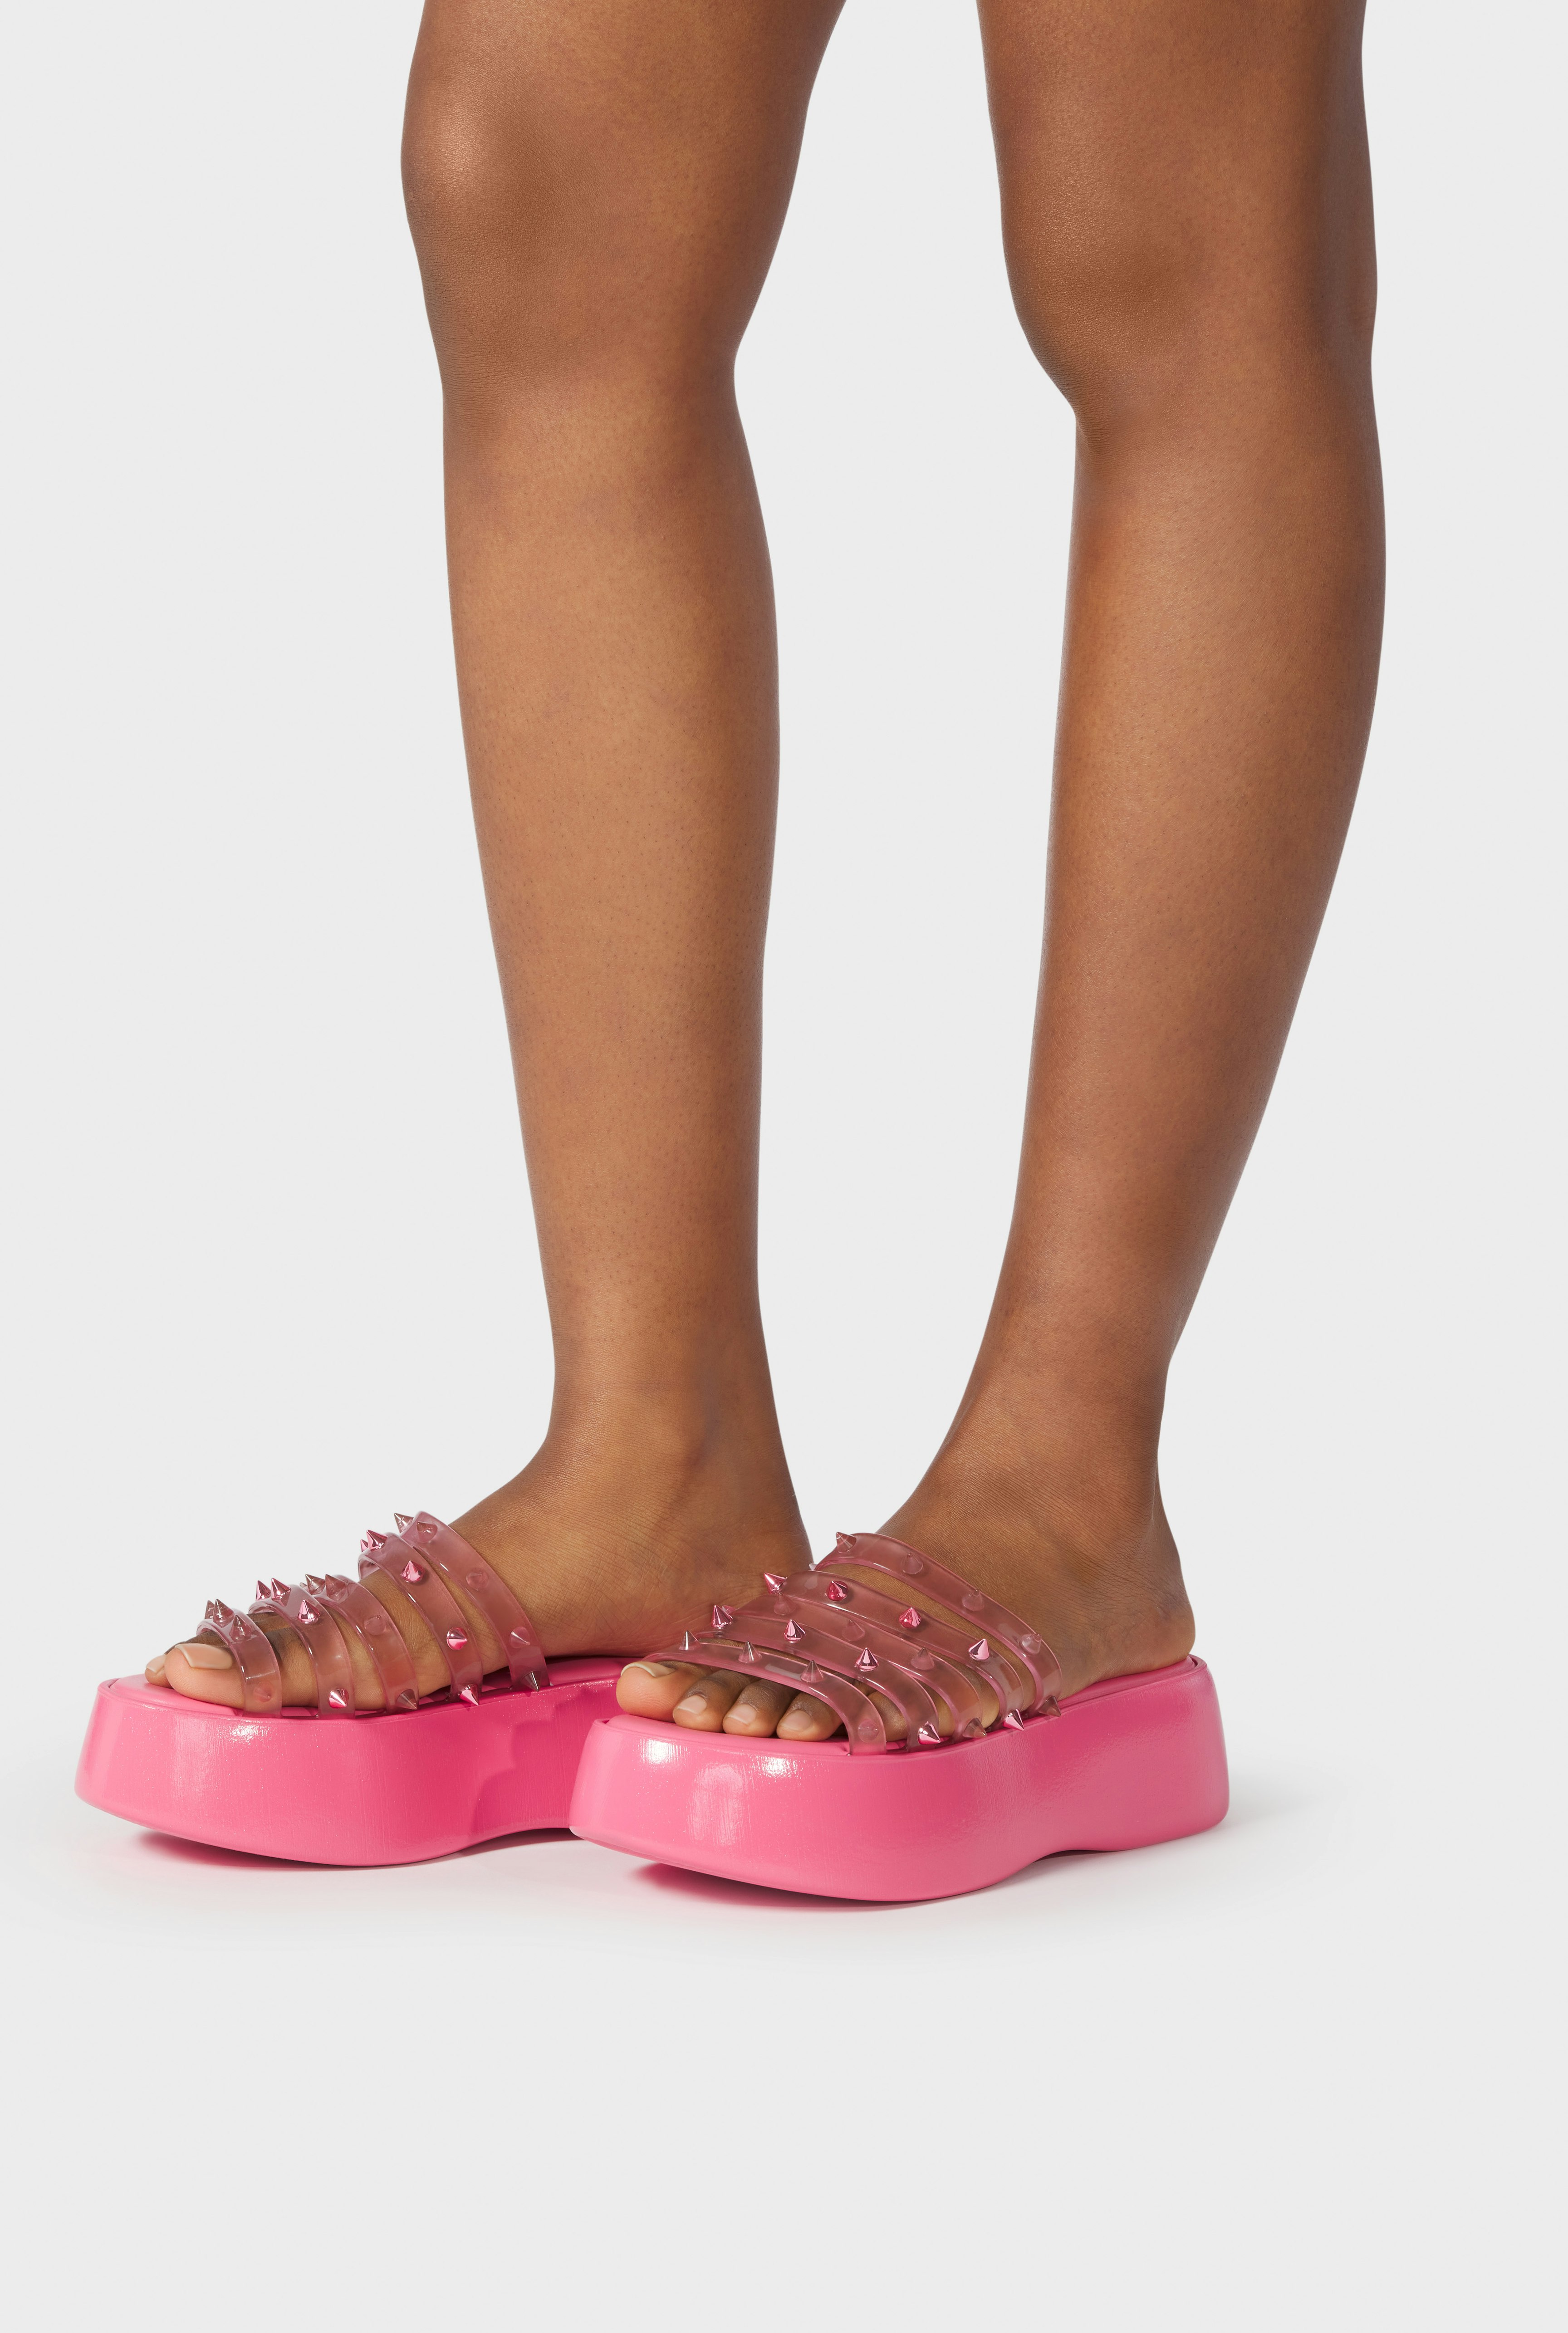 JPG x Melissa: The Pink Becky Punk Love Mules hover